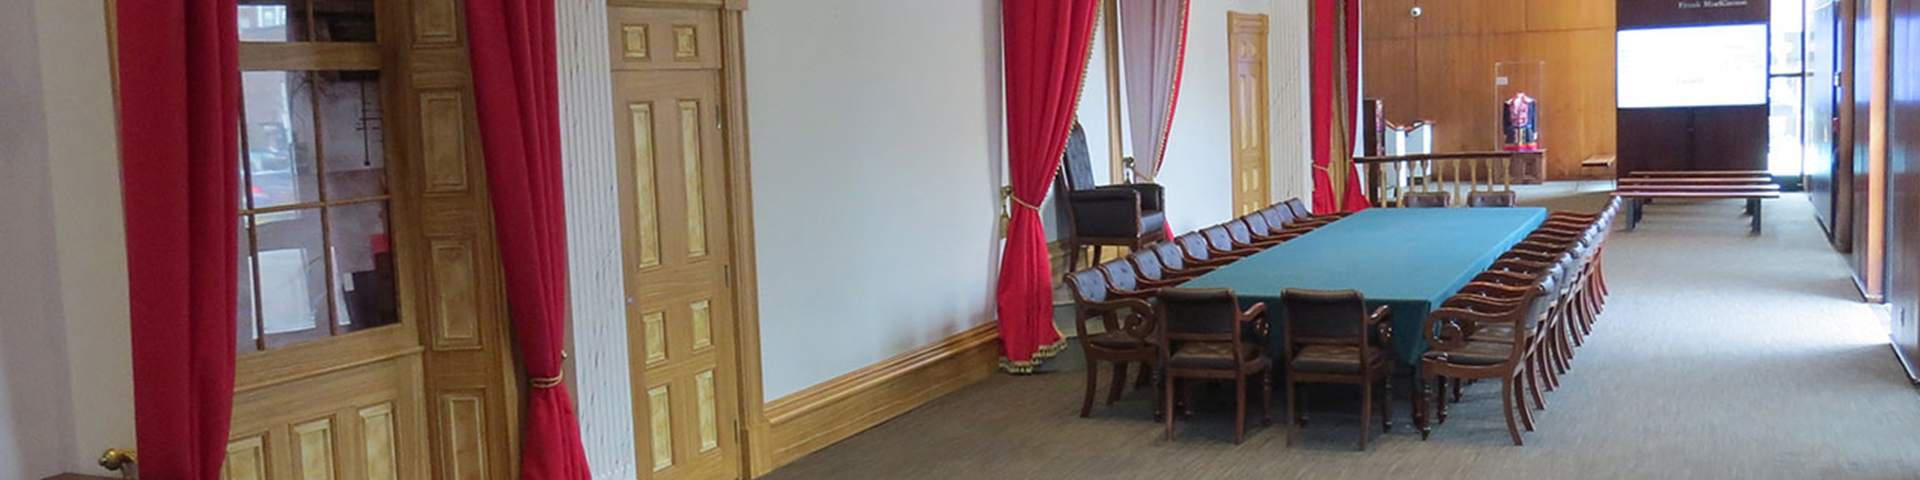 Confederation chamber in Story of Confederation exhibit.